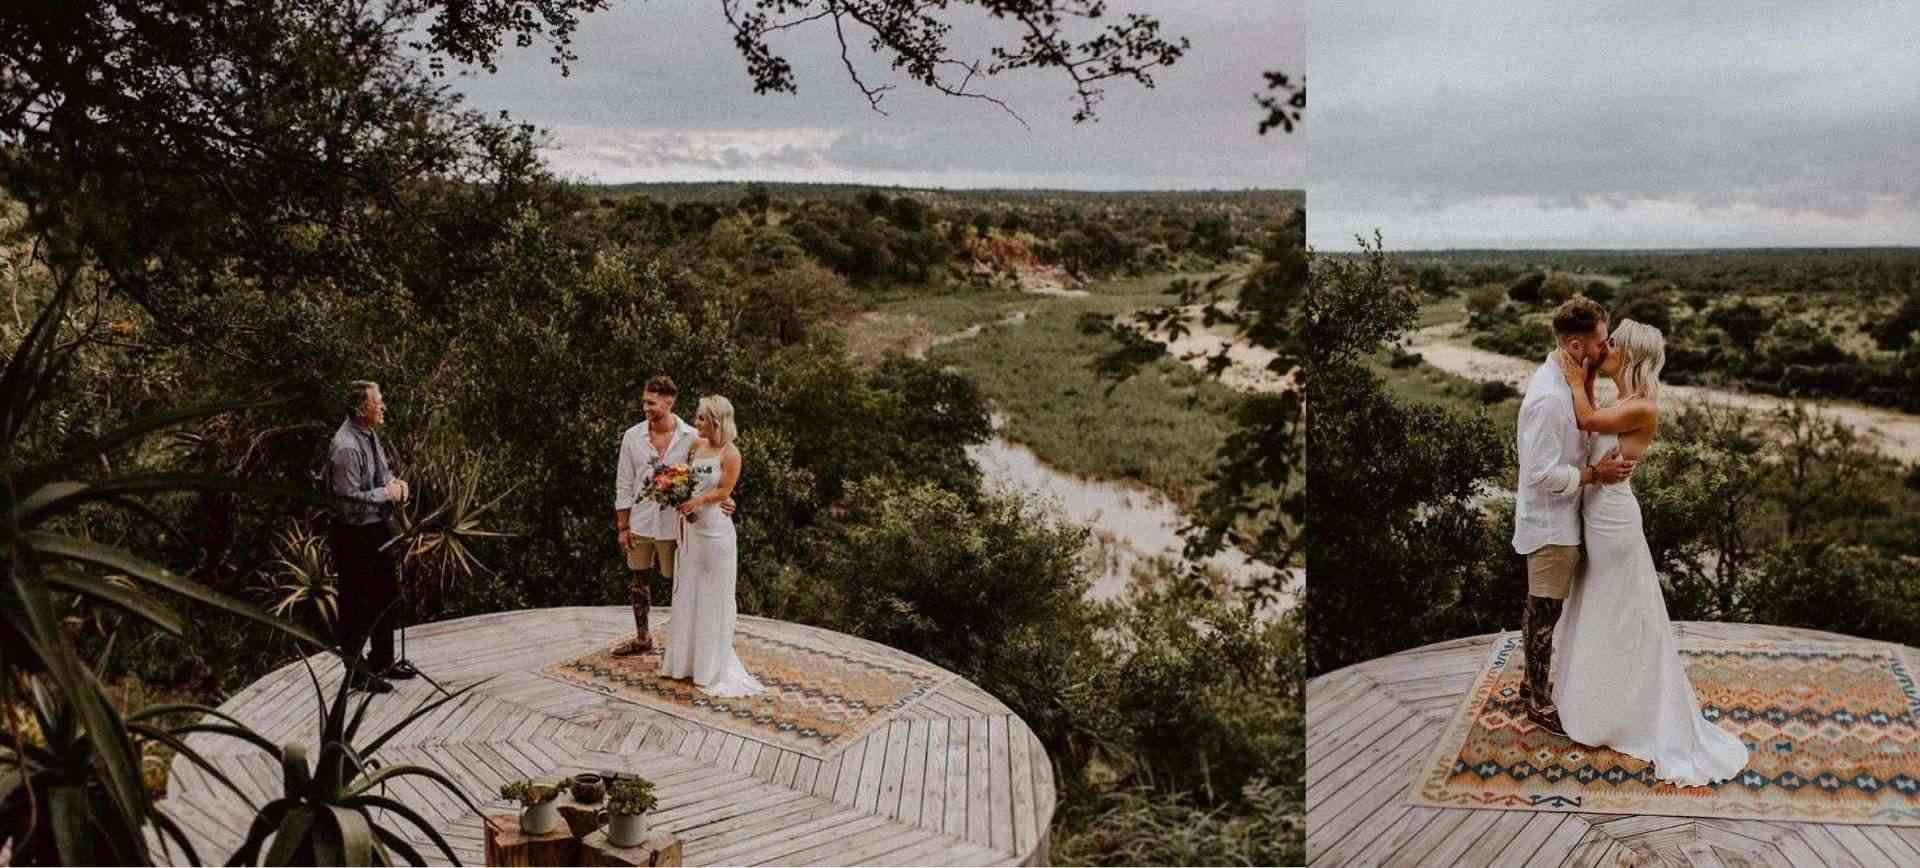 all-inclusive elopement and safari honeymoon in south africa